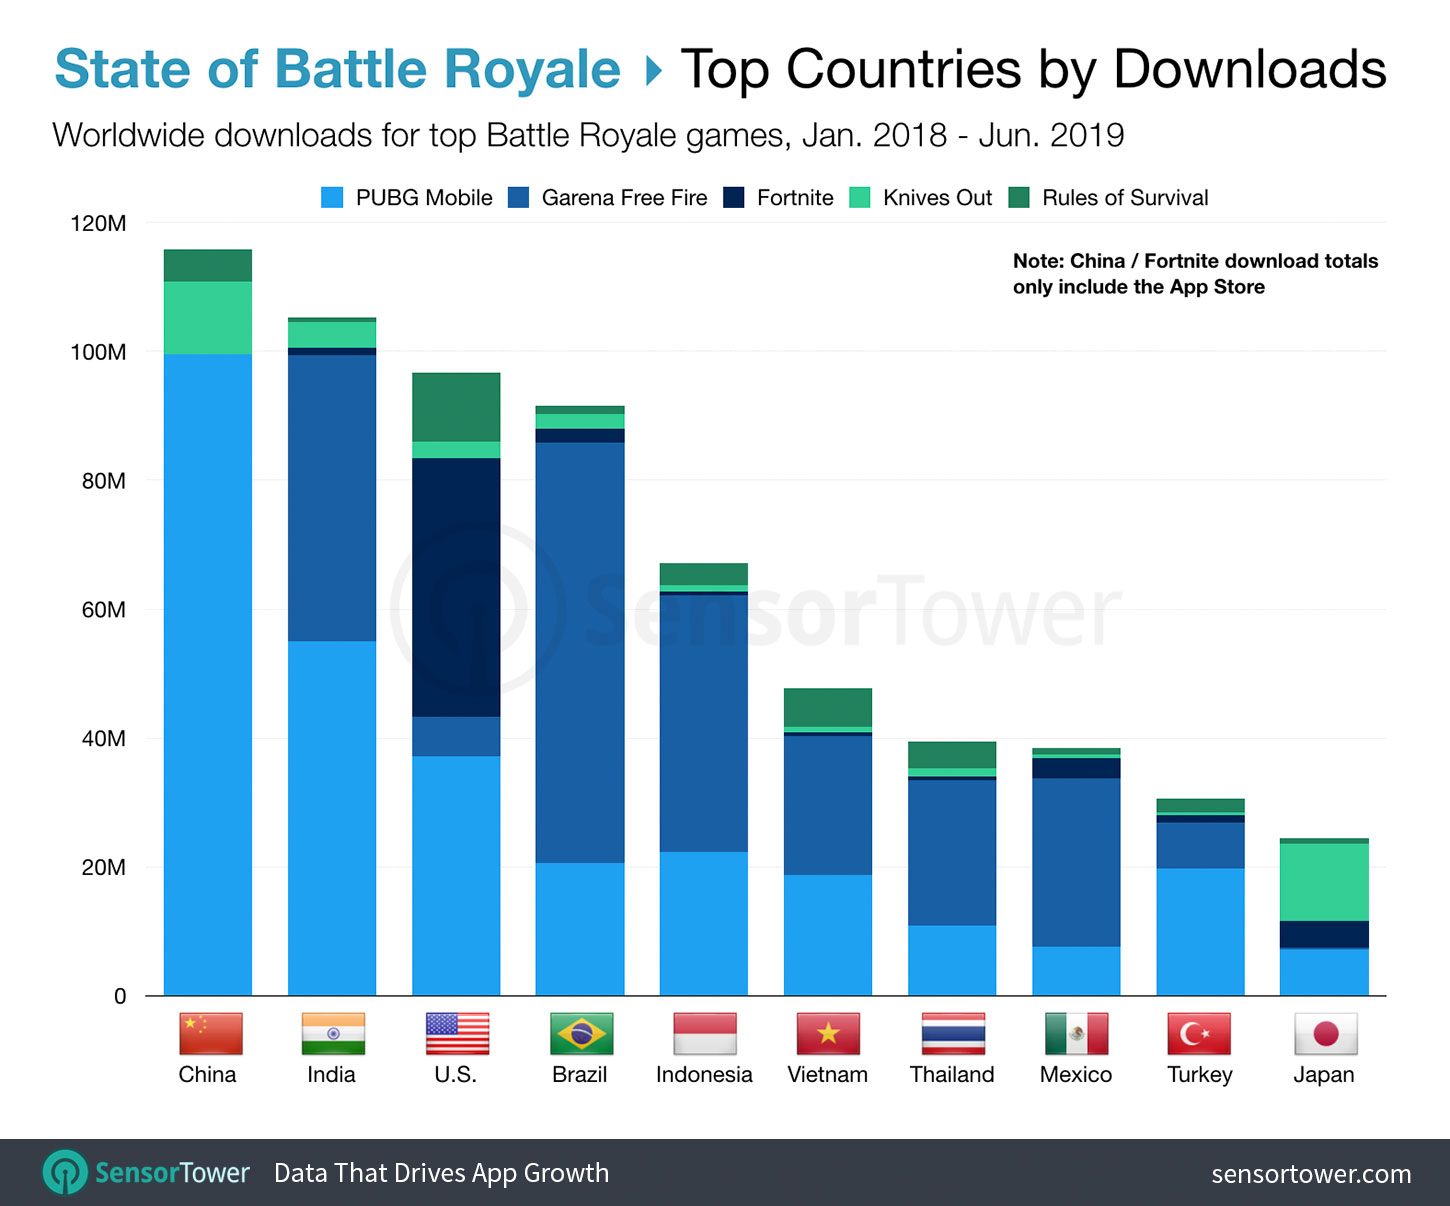 The State of Mobile Battle Royale Games in Q2 2019